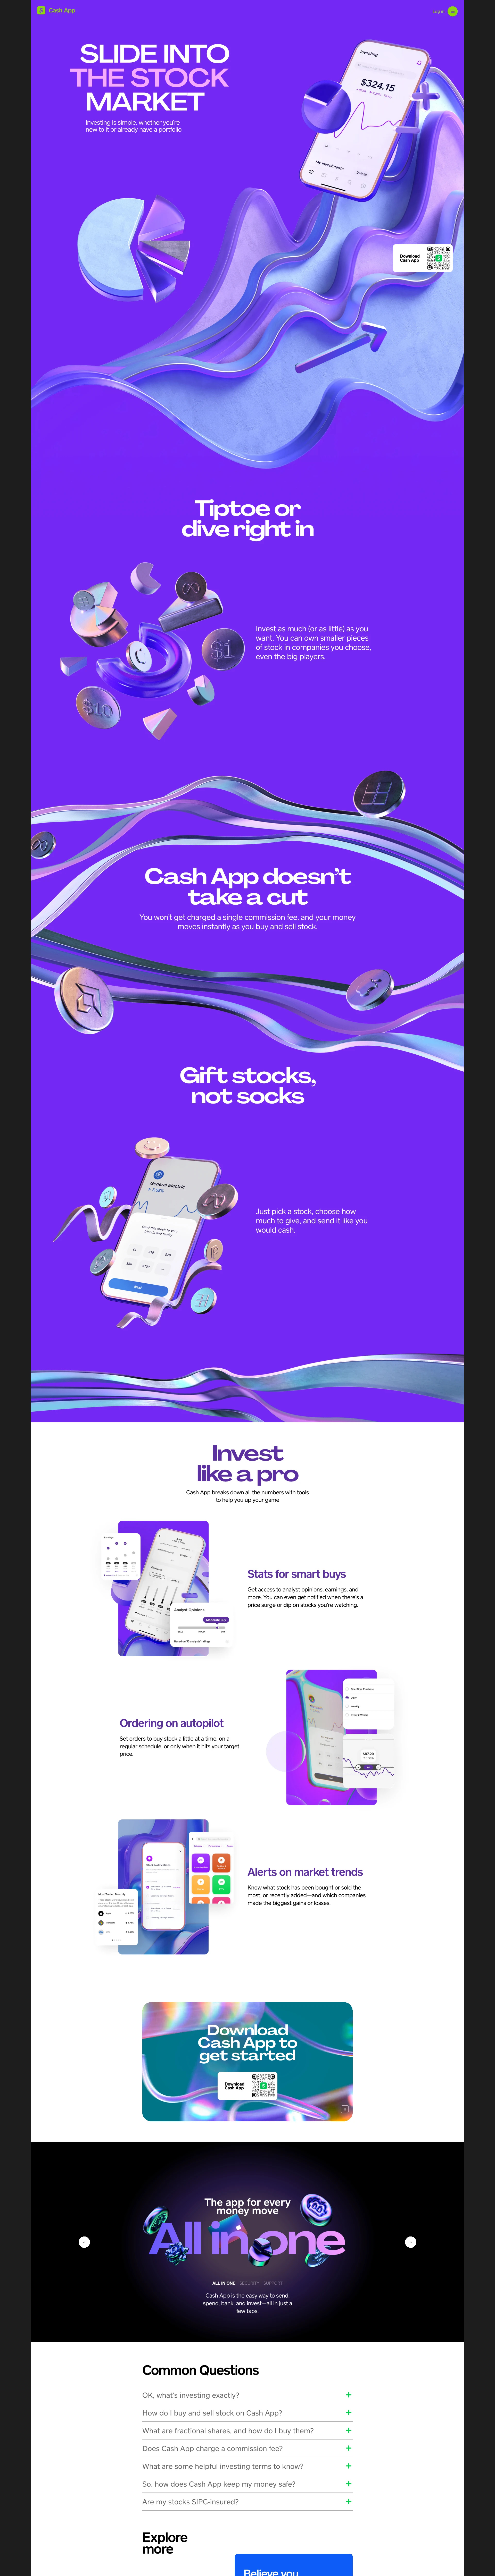 Cash App Landing Page Example: Cash App is the #1 finance app in the App Store. Pay anyone instantly. Save when you spend. Bank like you want to. And buy stocks or bitcoin with as little as $1.